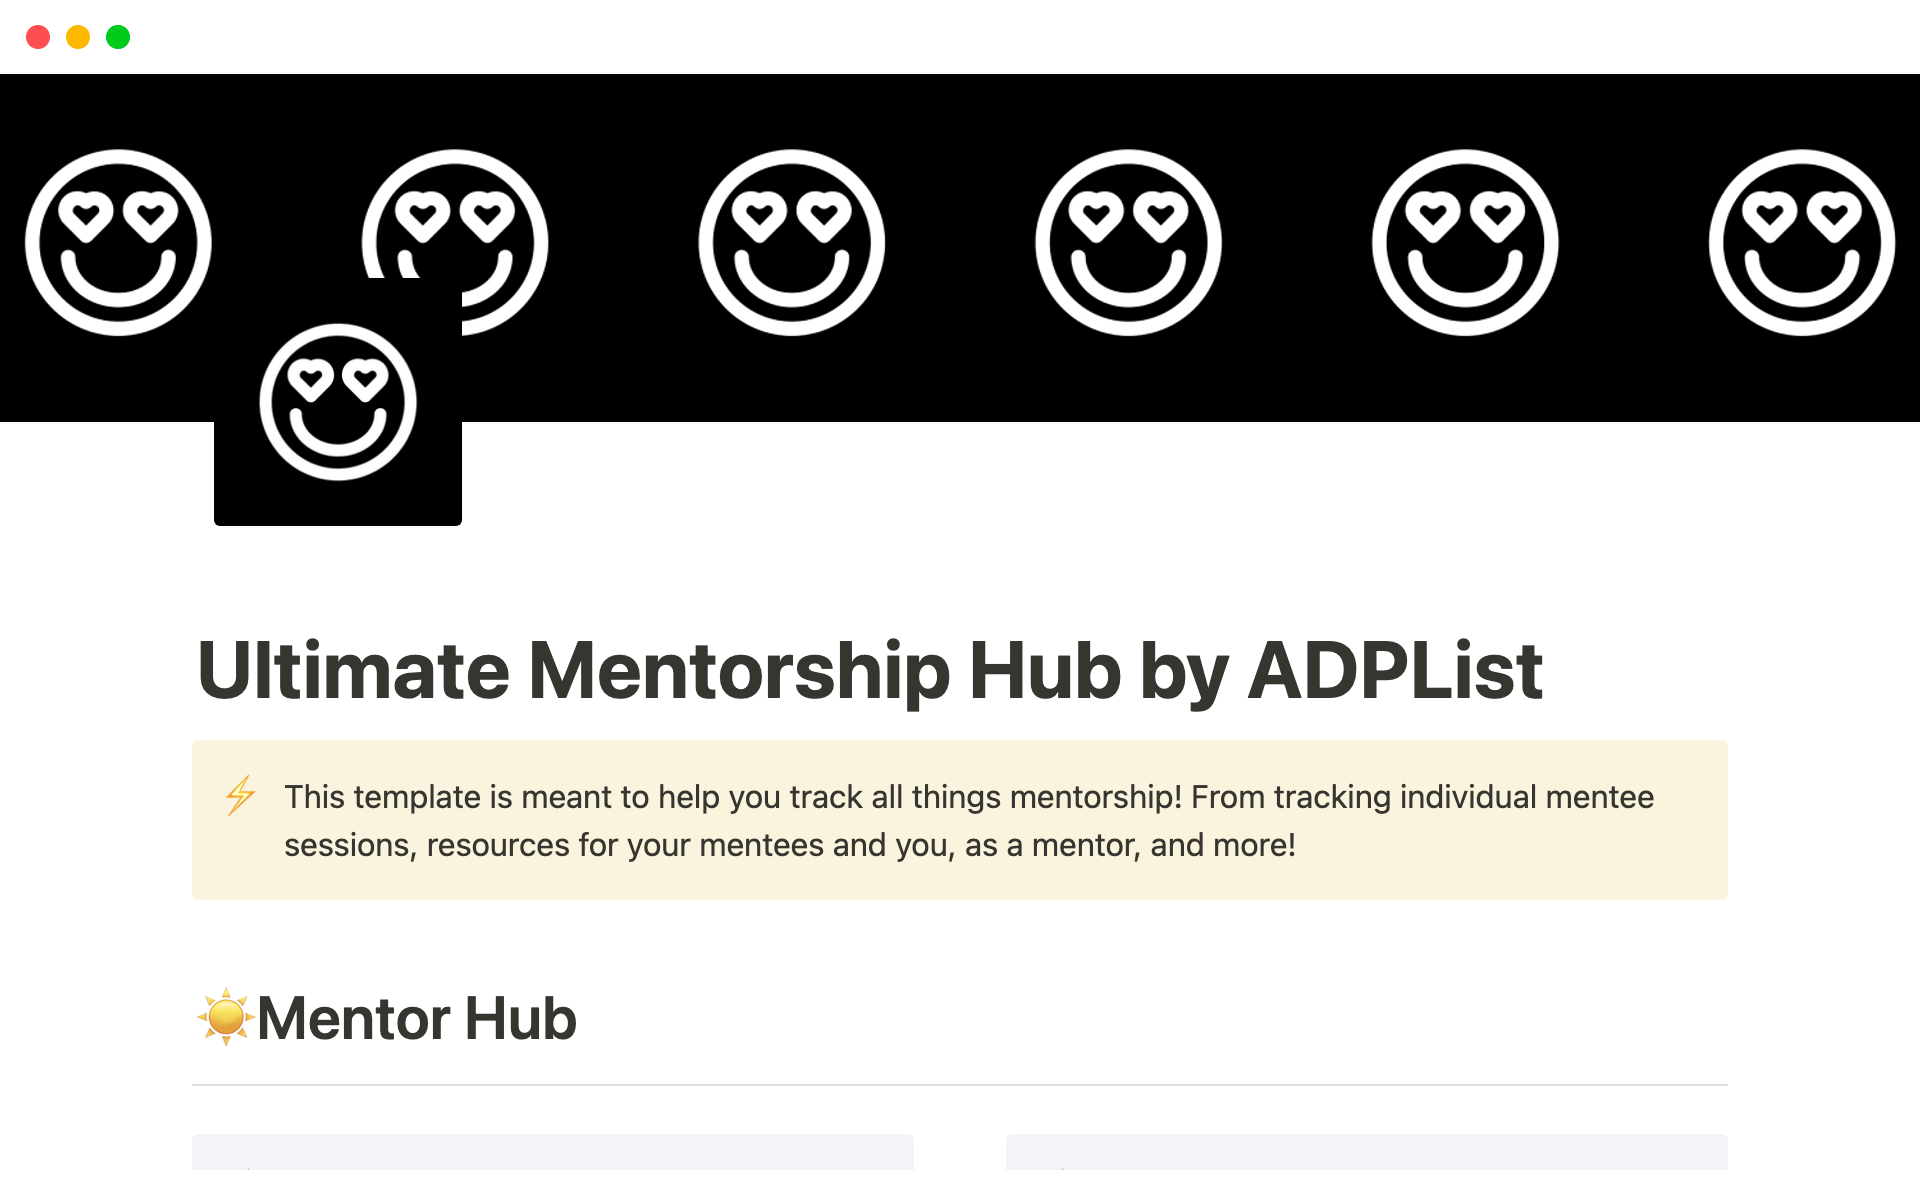 Keep track of your mentorship goals, mentees progress, and resources all in one place!